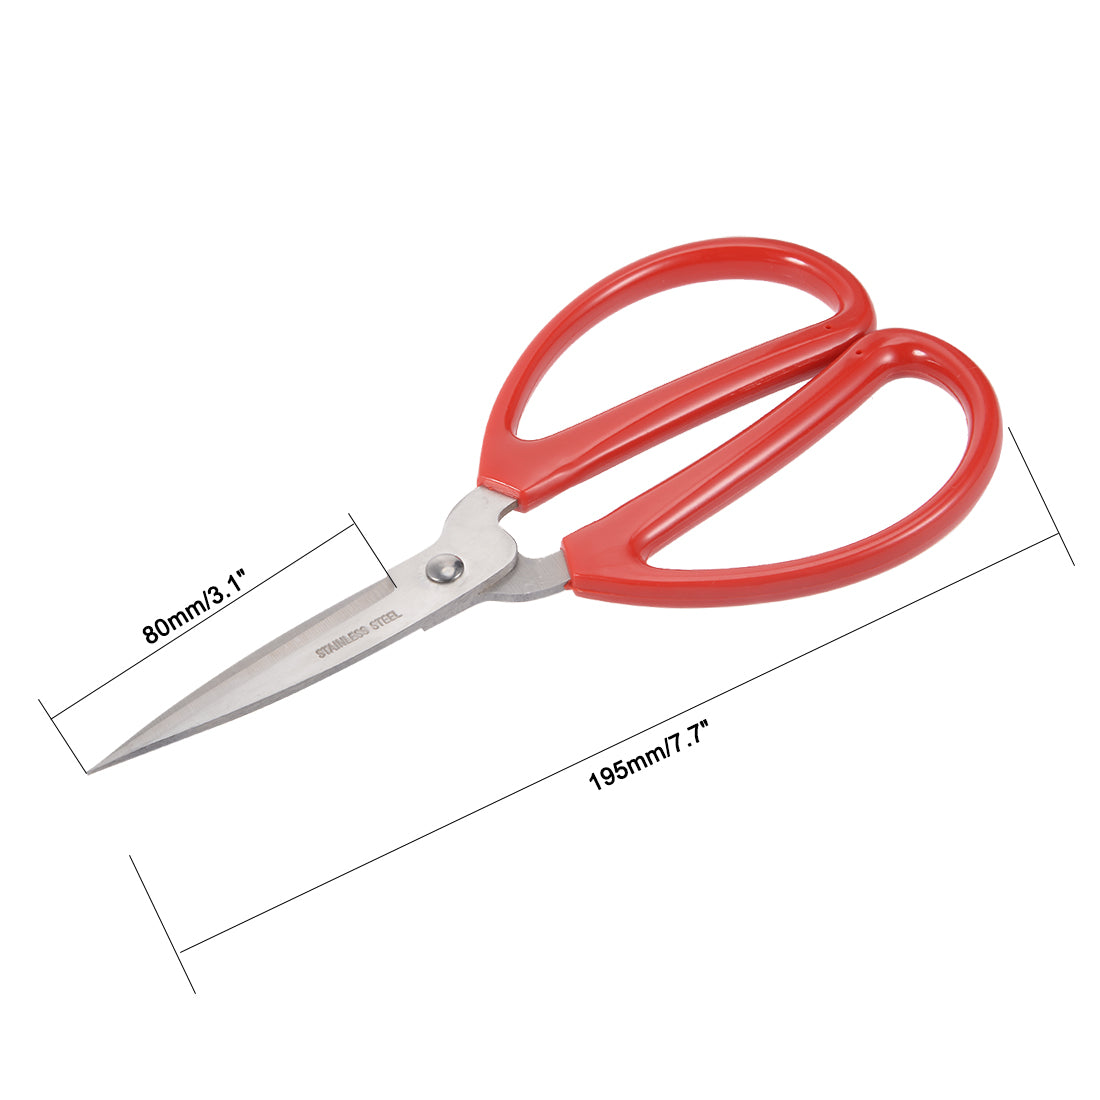 uxcell Uxcell 7.7 Inch Stainless Steel Scissor for Office Home Cutting, Straight Red Handle